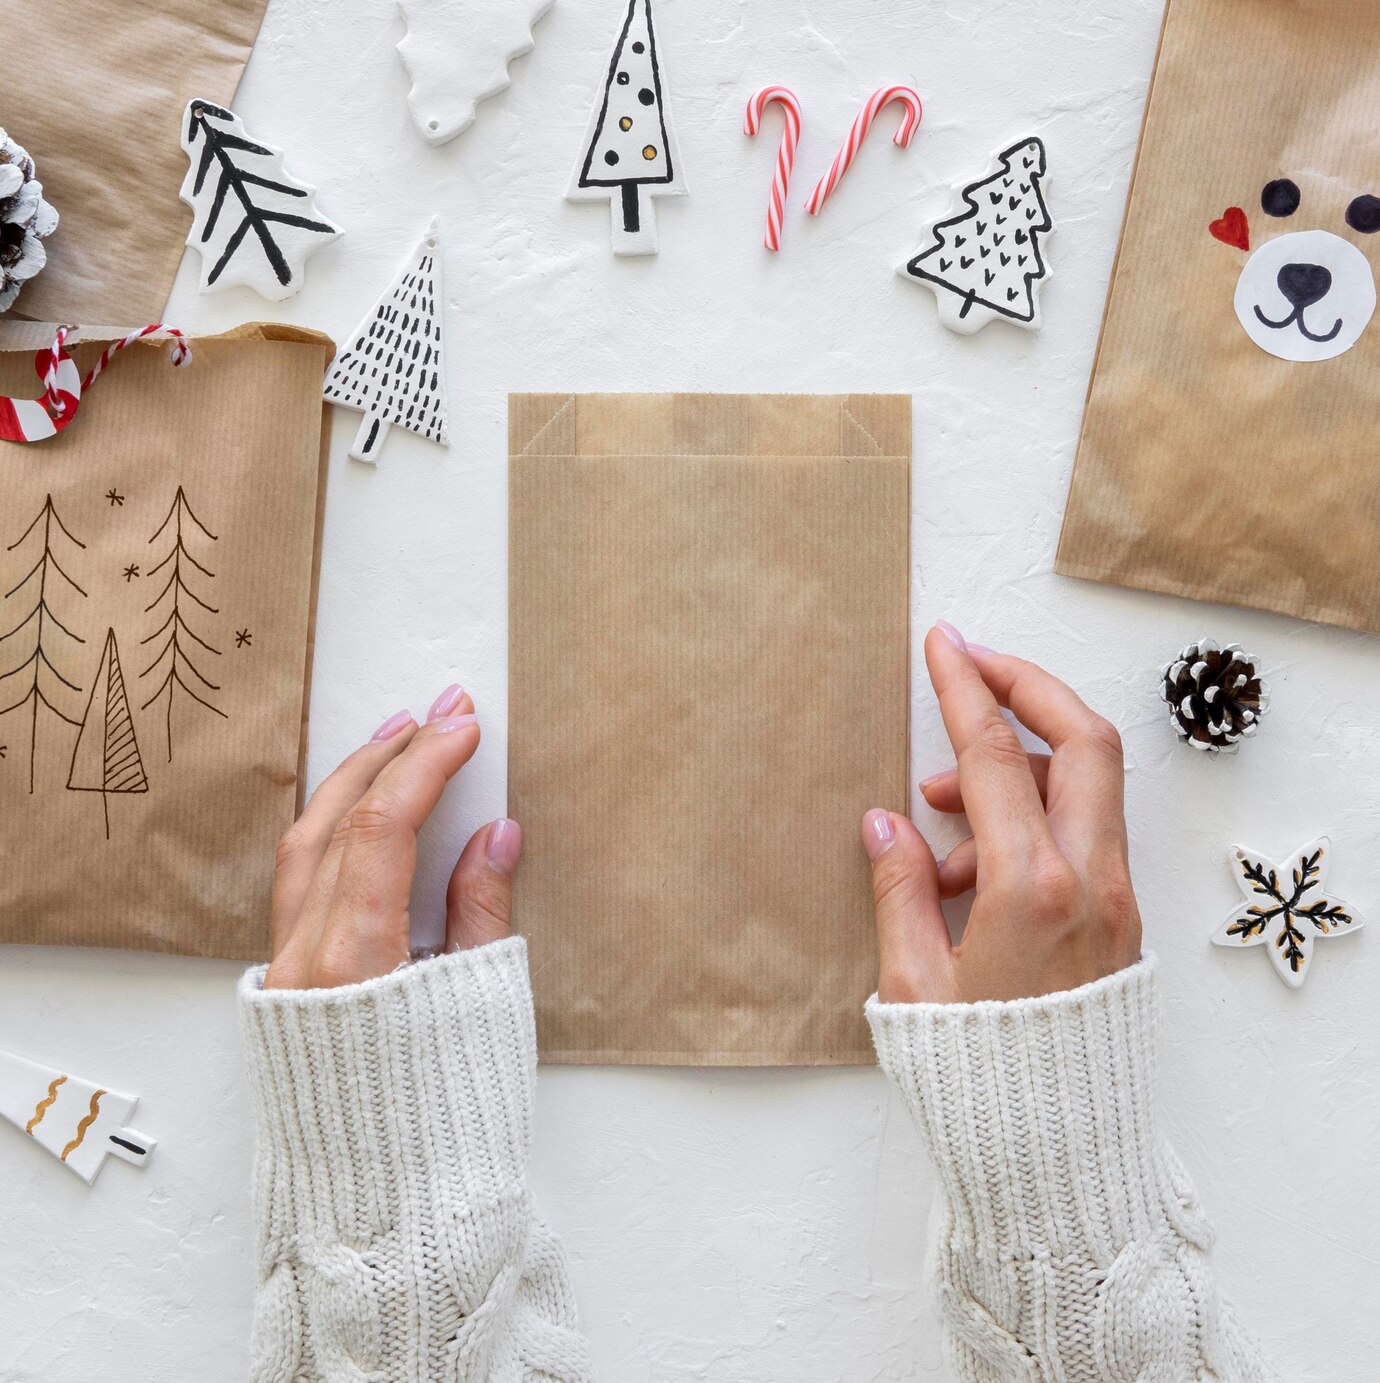 Guide To Make A Gift Bag With Paper-Based